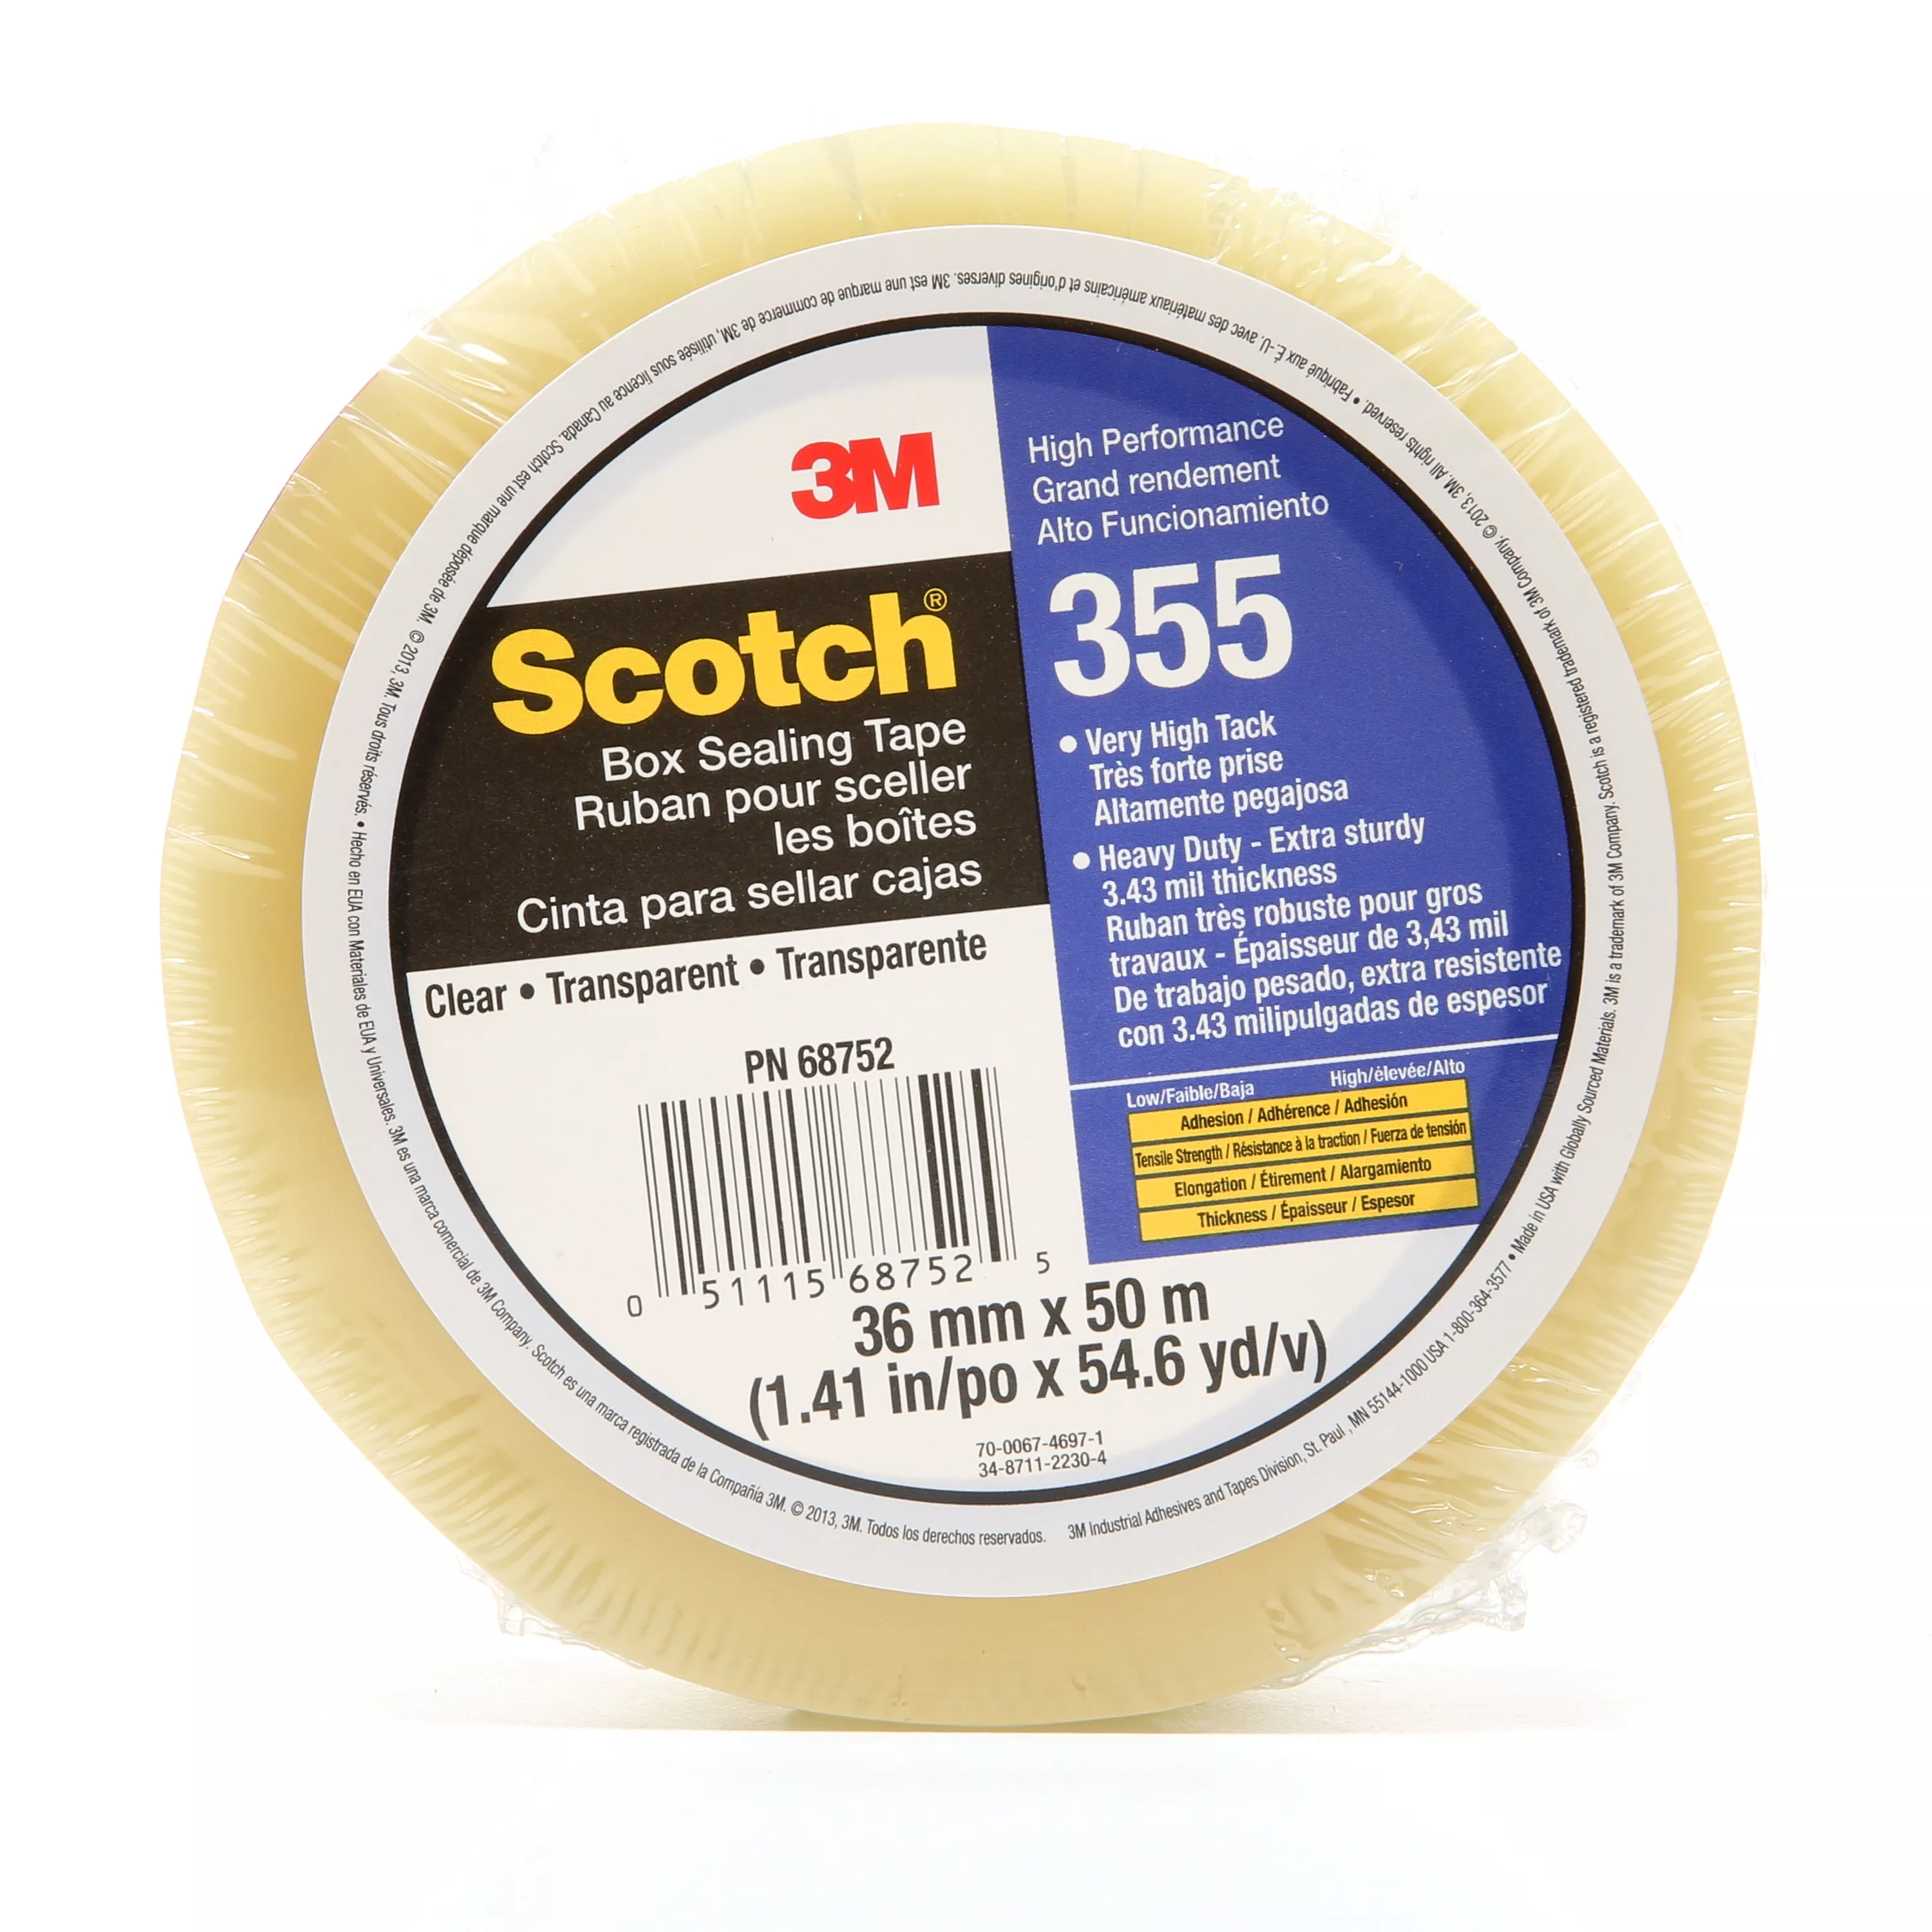 Scotch® Box Sealing Tape 355, Clear, 36mm x 50m, 48/Case, Individually
Wrapped Conveniently Packaged